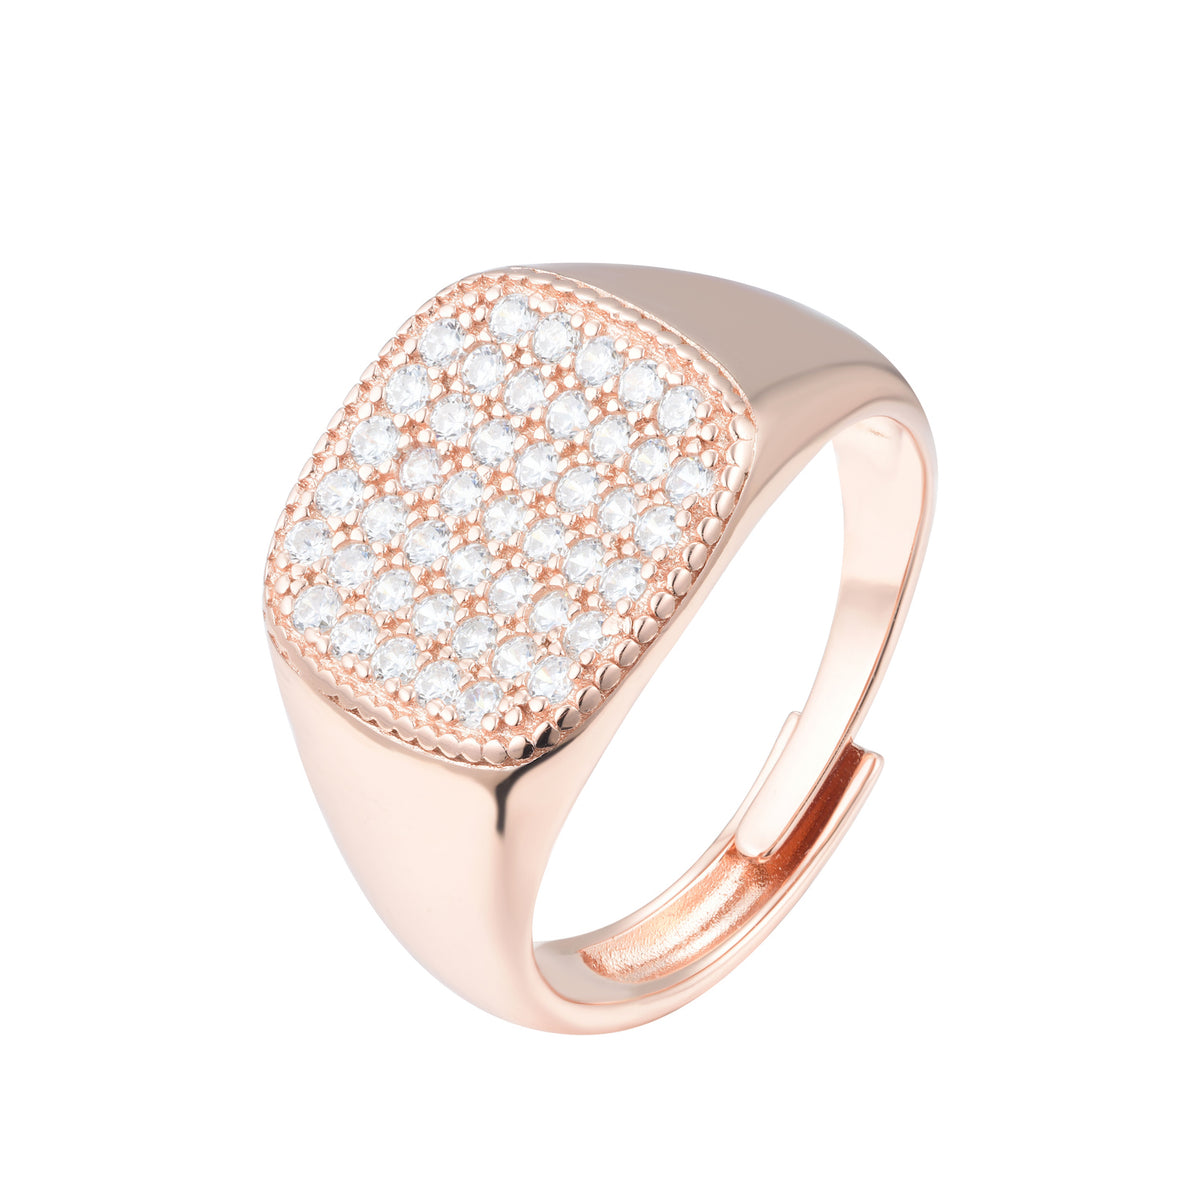 Fortuna | San Gimignano Ring | 925 Silver | White CZ | Rose Gold Plated